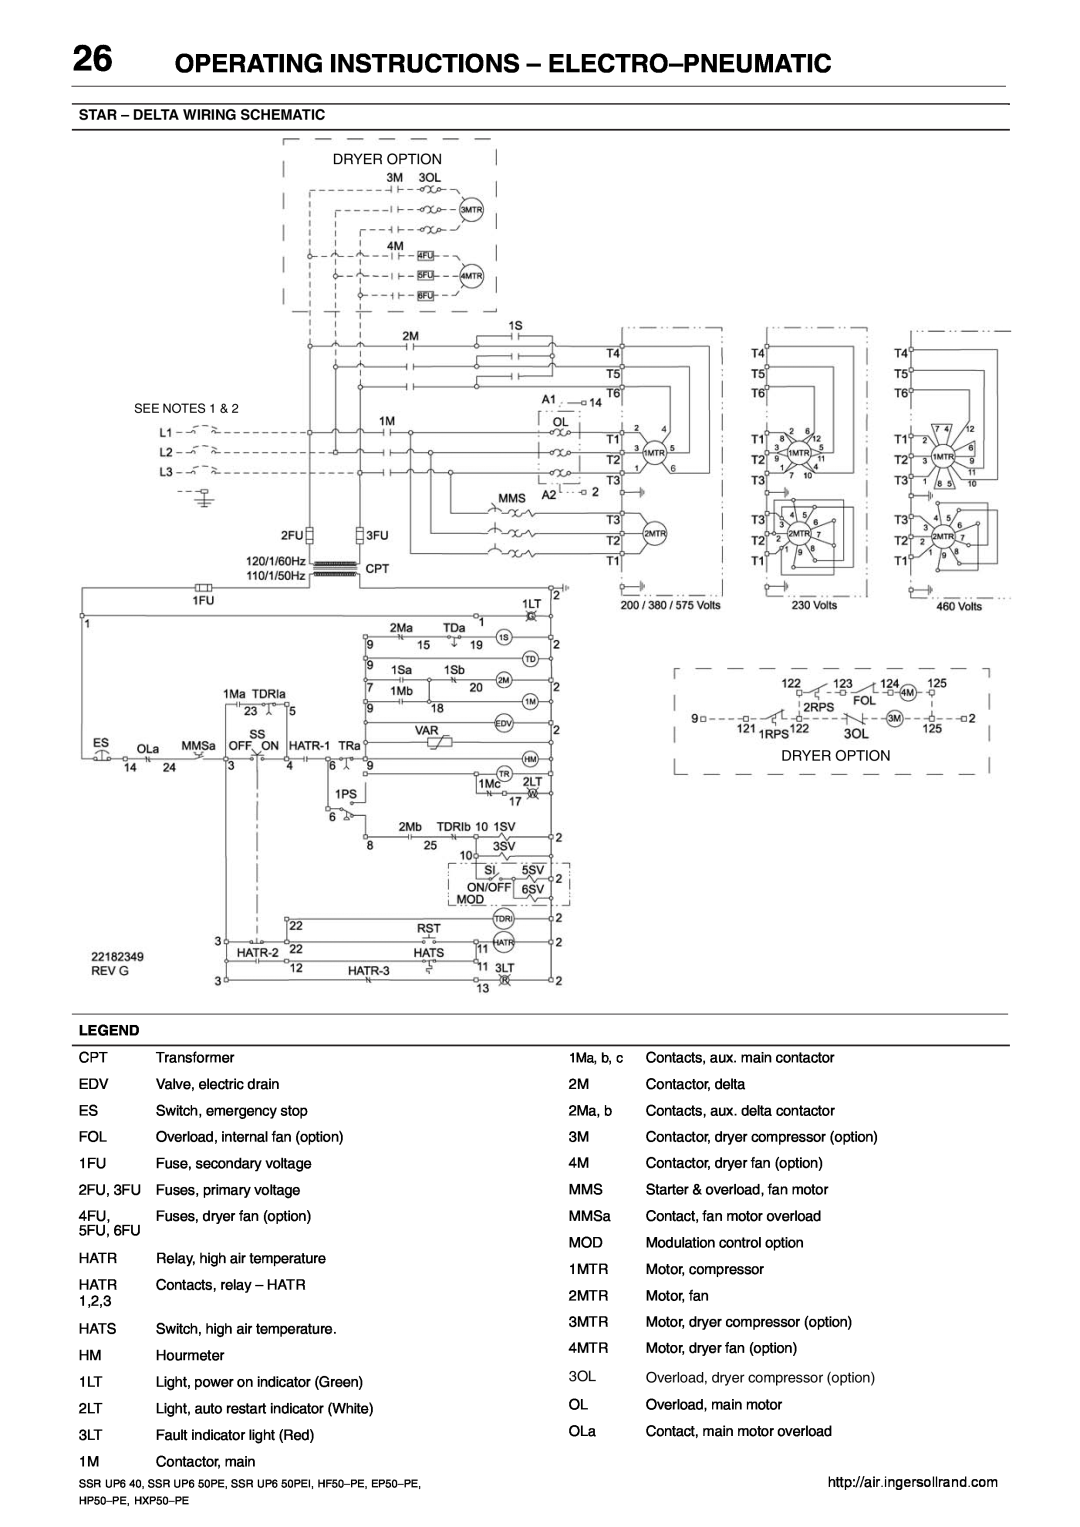 Ingersoll-Rand HXP50-PE, SSR UP6 40, SSR UP6 50PE Operating Instructions - Electro-Pneumatic, Star - Delta Wiring Schematic 